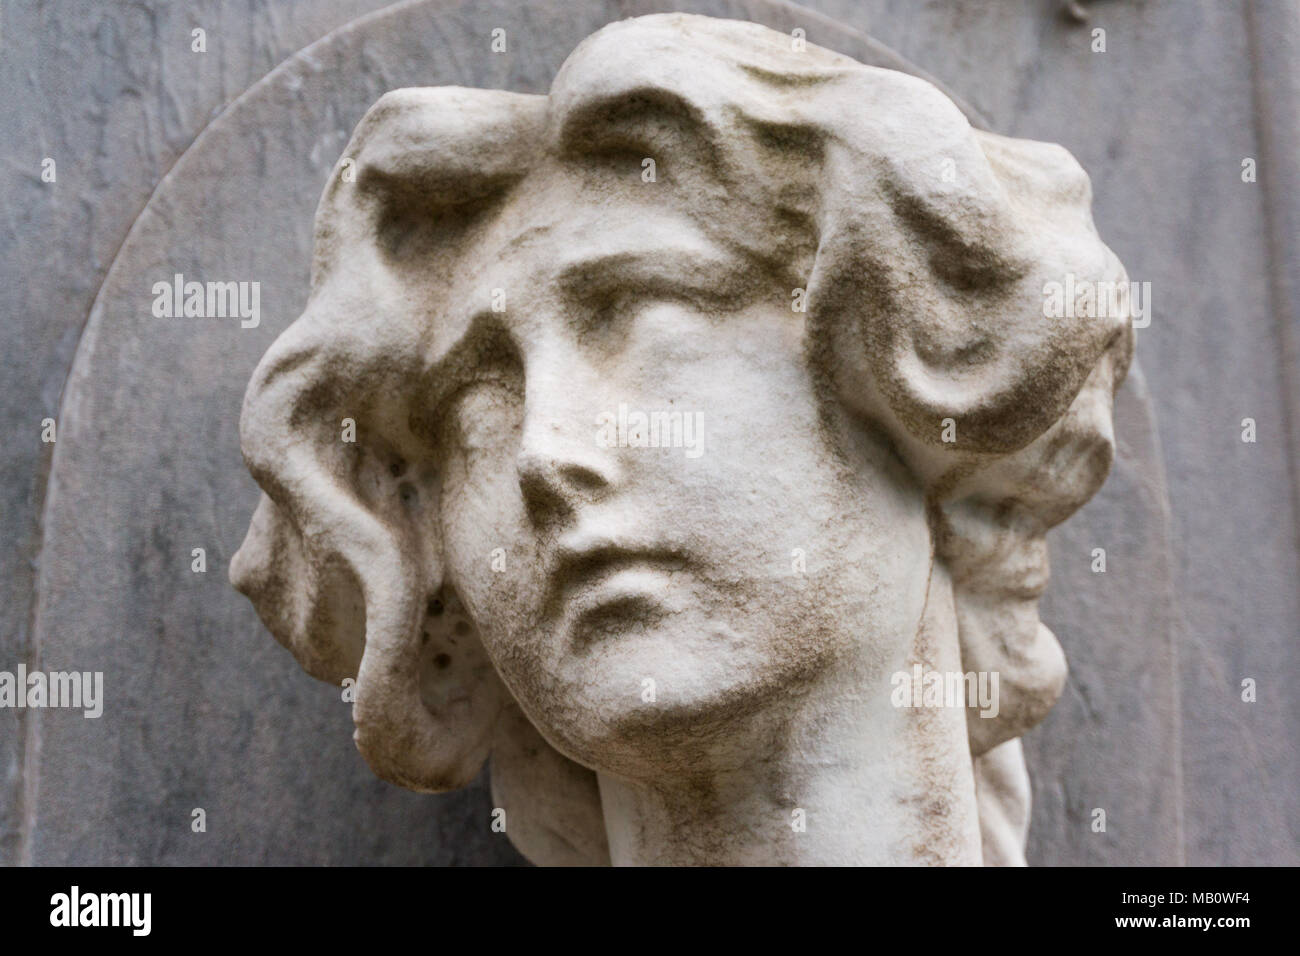 Inconsolable - Protestant Cemetery - Rome Stock Photo